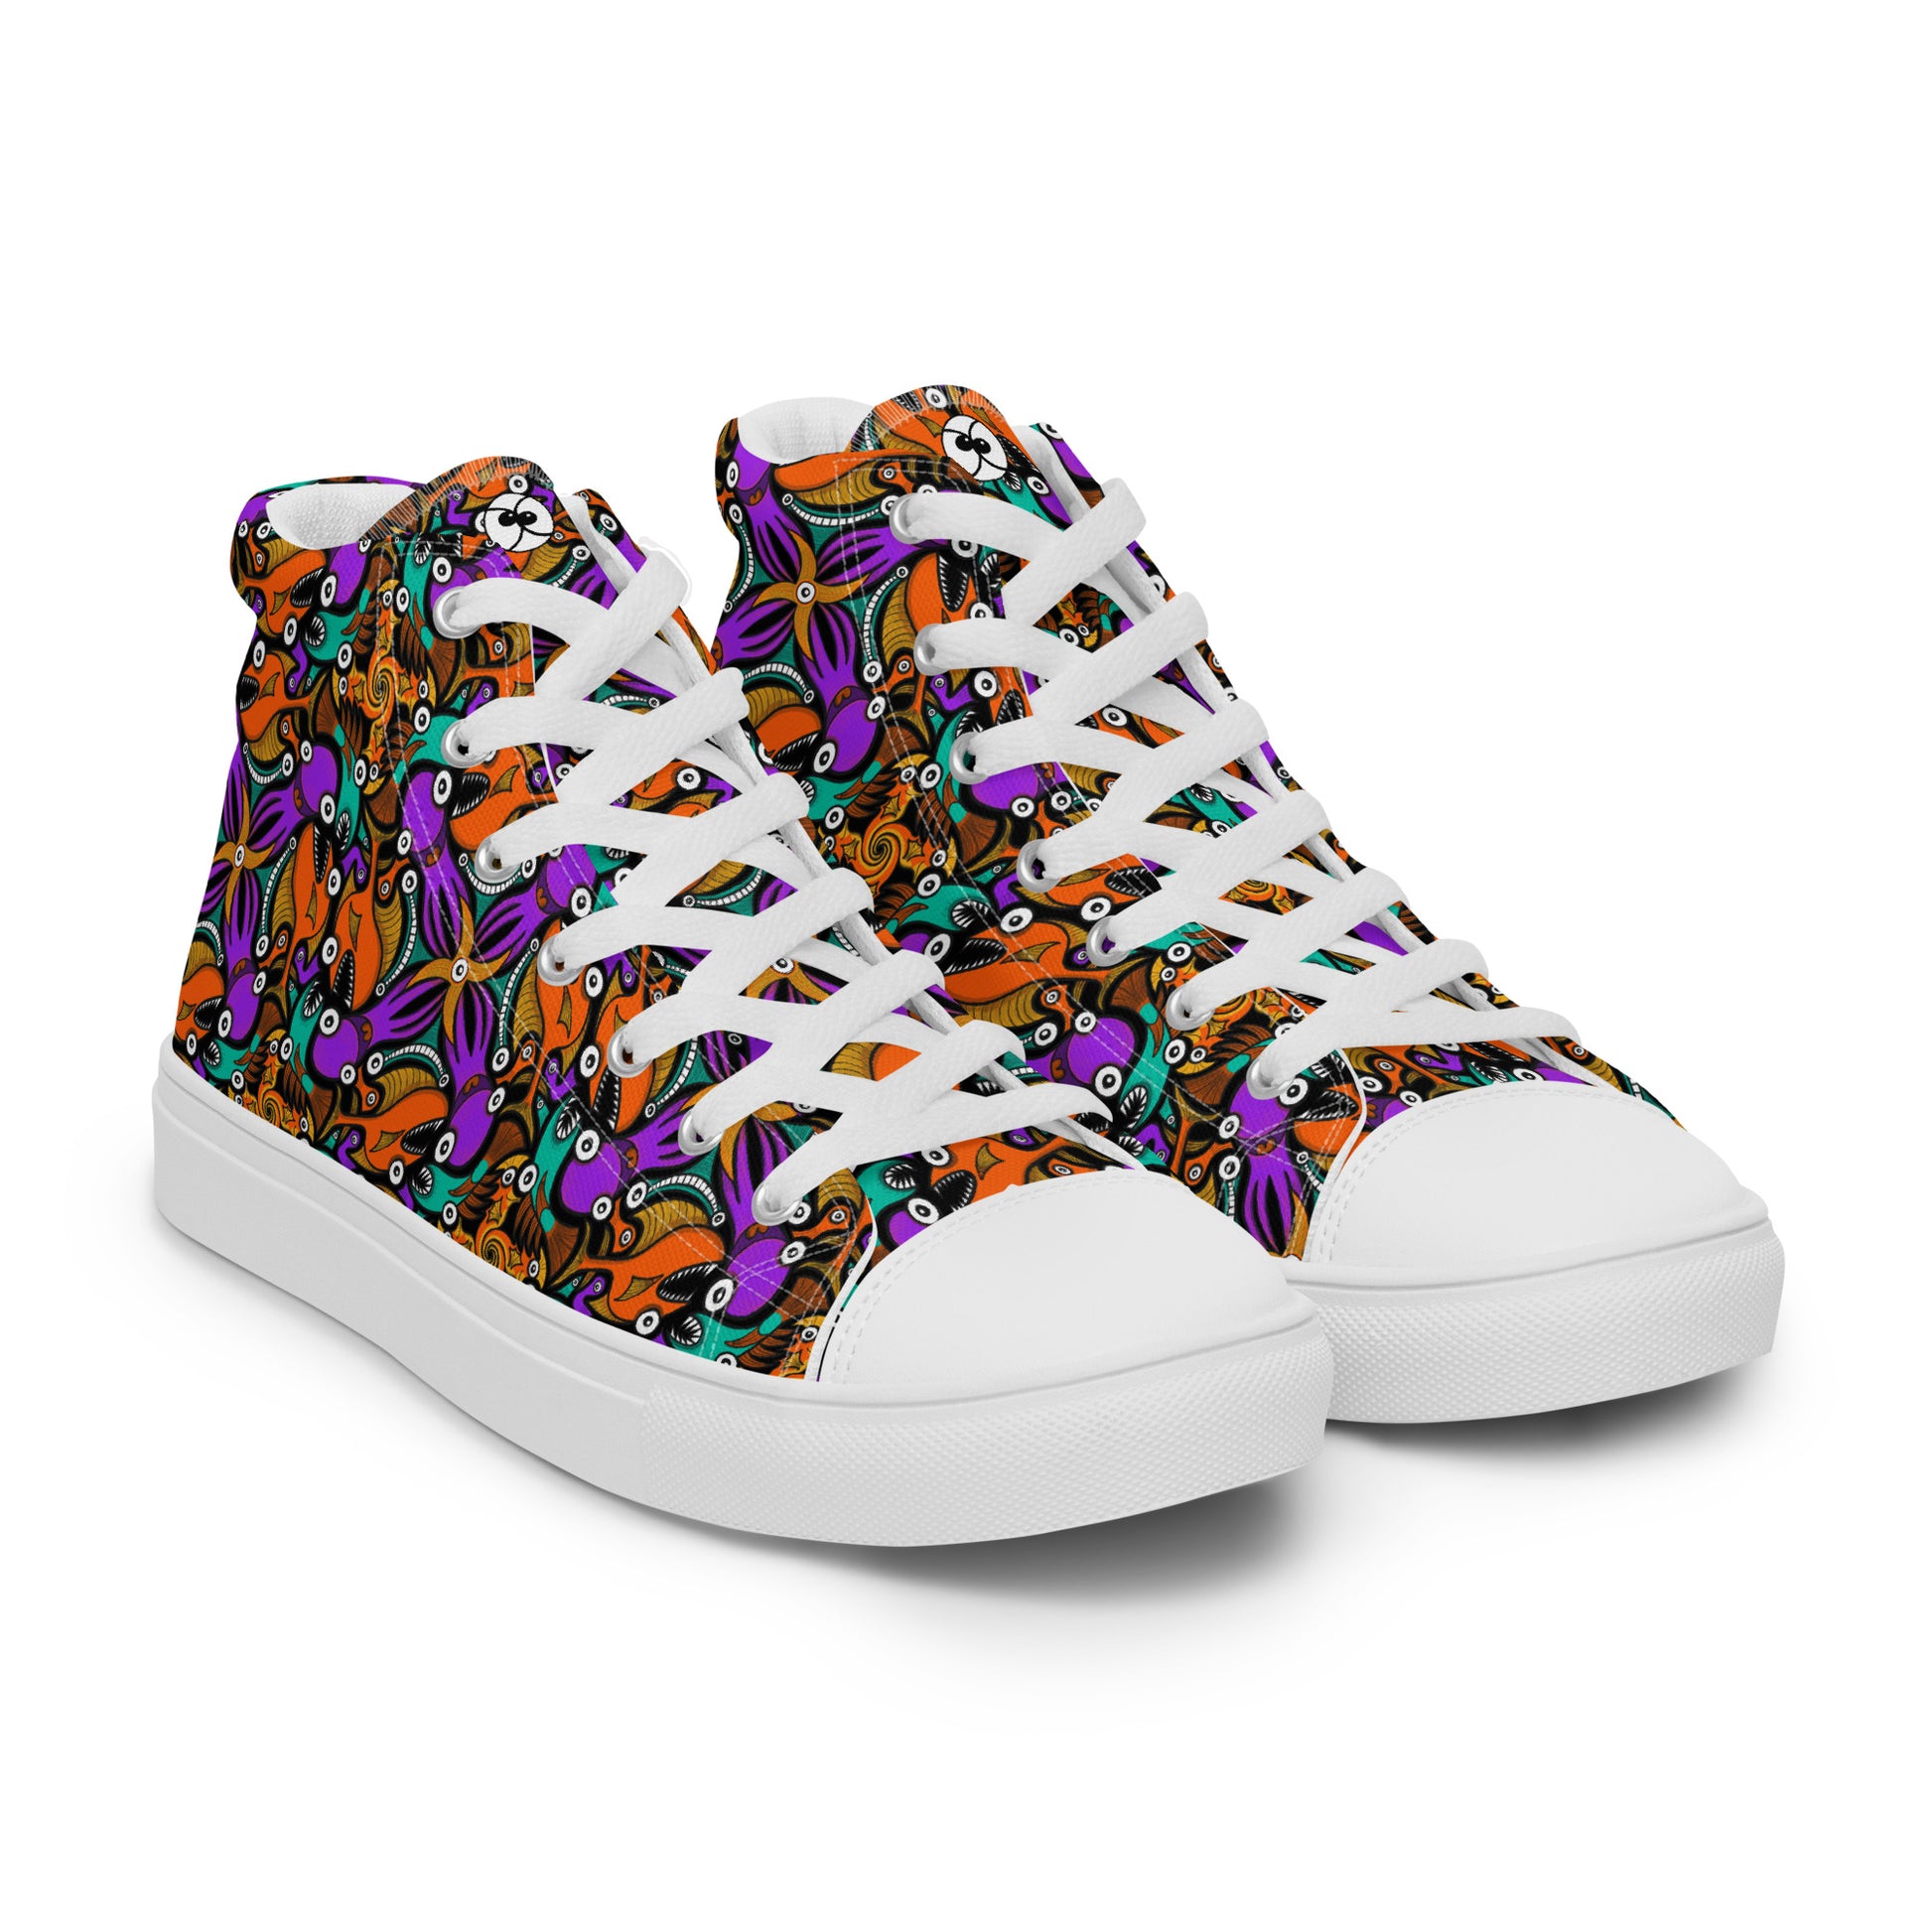 Mesmerizing creatures straight from the deep ocean Women’s high top canvas shoes. Overview